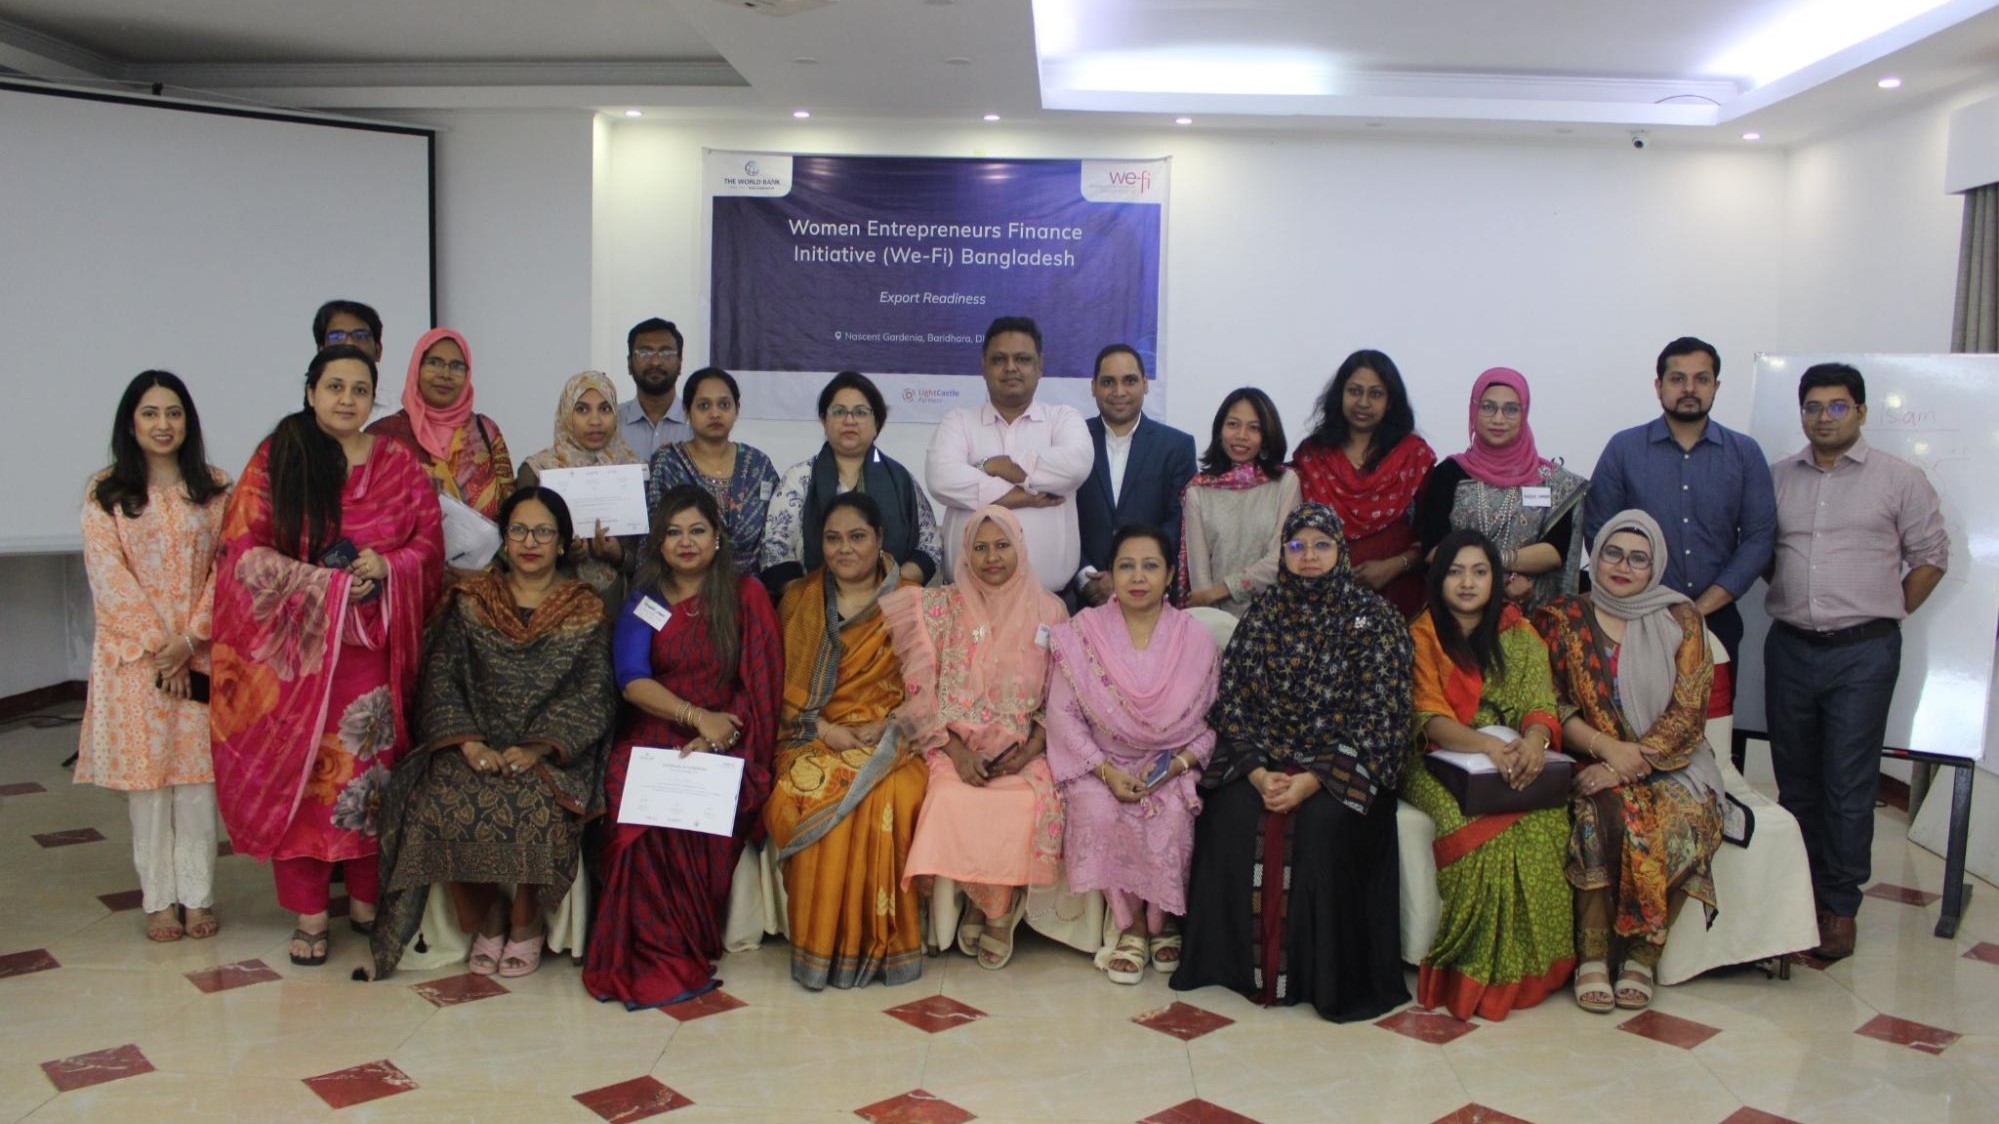 LightCastle Conducts Workshop on Export Readiness for Women-Led SMEs